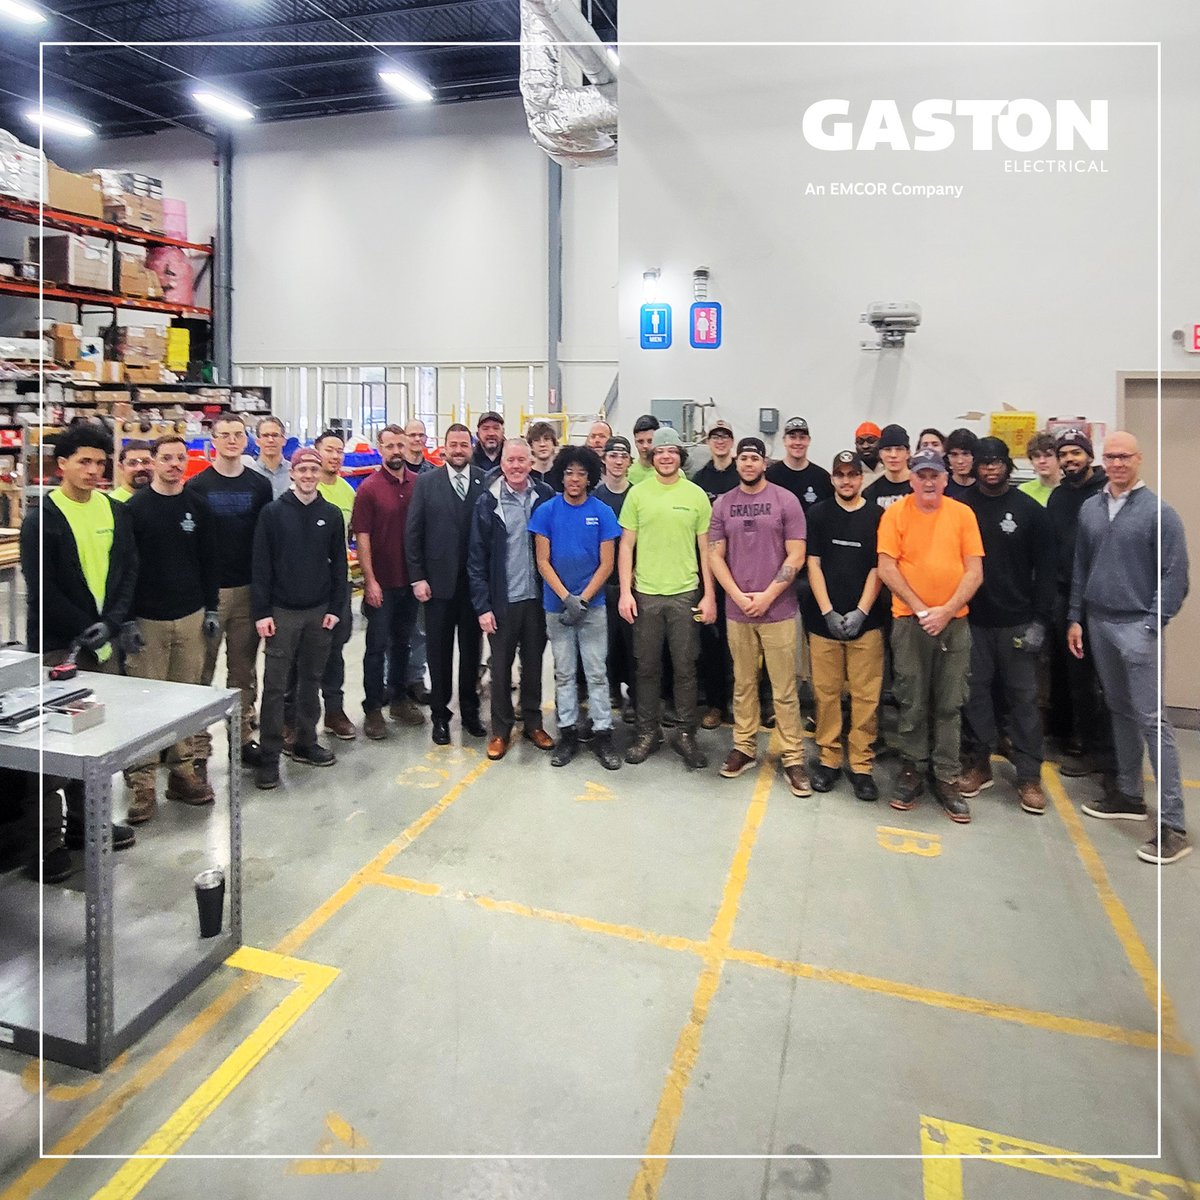 We'd like to thank State @SenatorMikeRush and Rep. @TedPhilips for visiting the Gaston #Prefabrication Shop today. Lots of great discussion on #Boston's construction market, workforce development, safety, innovation, and industry best practices. @IBEW103 @necaboston @universalhub